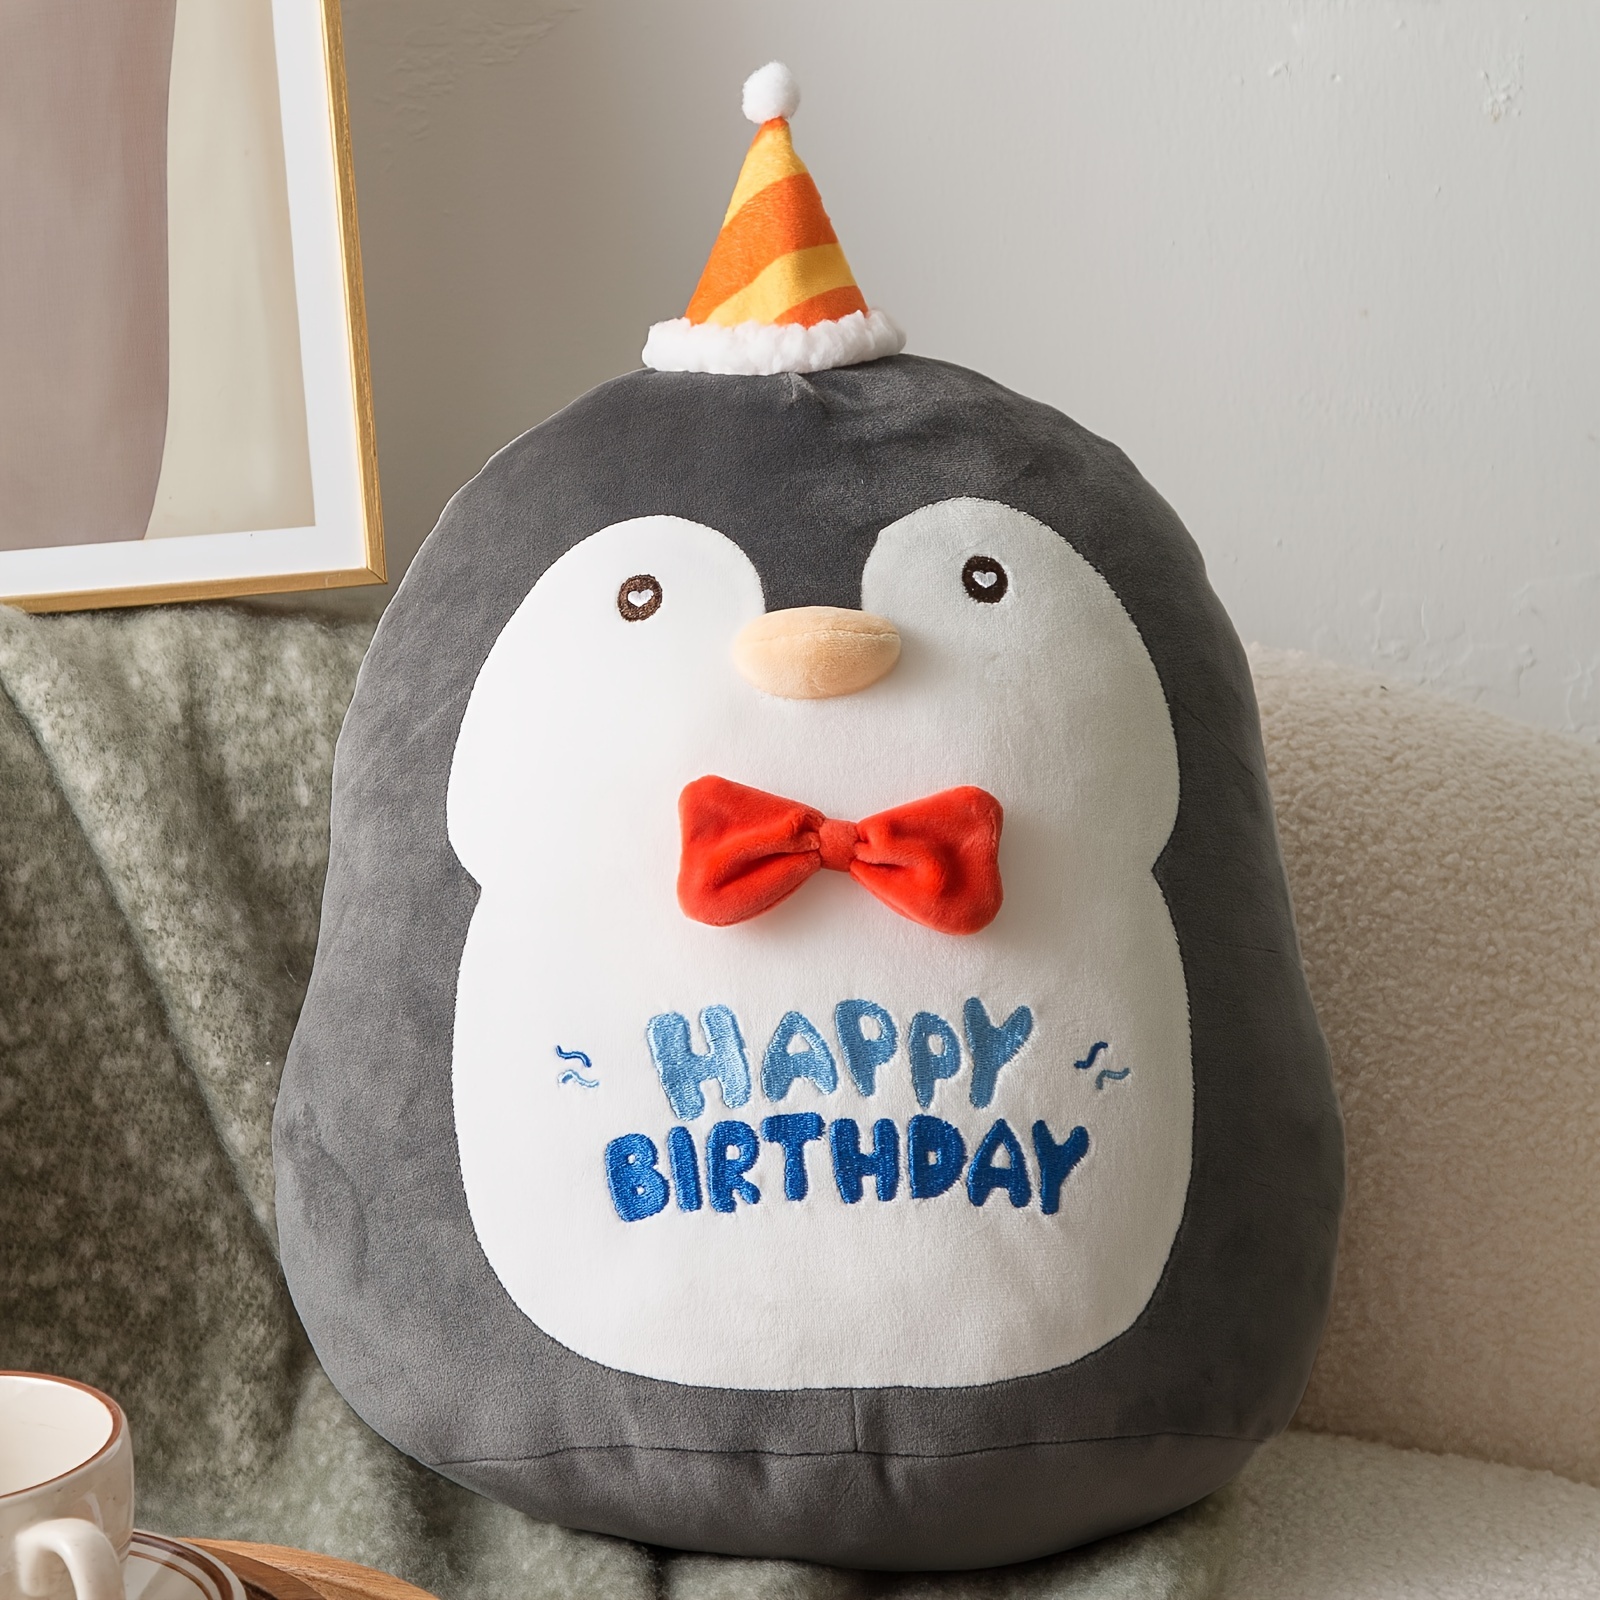 

17 Inch Birthday Penguin Plush Pillow Sofa Cushion, Soft Penguin Plushies Toy Cute Bear Stuffed Animal Home Room Decoration Party Gift For Kids Birthday, Valentine